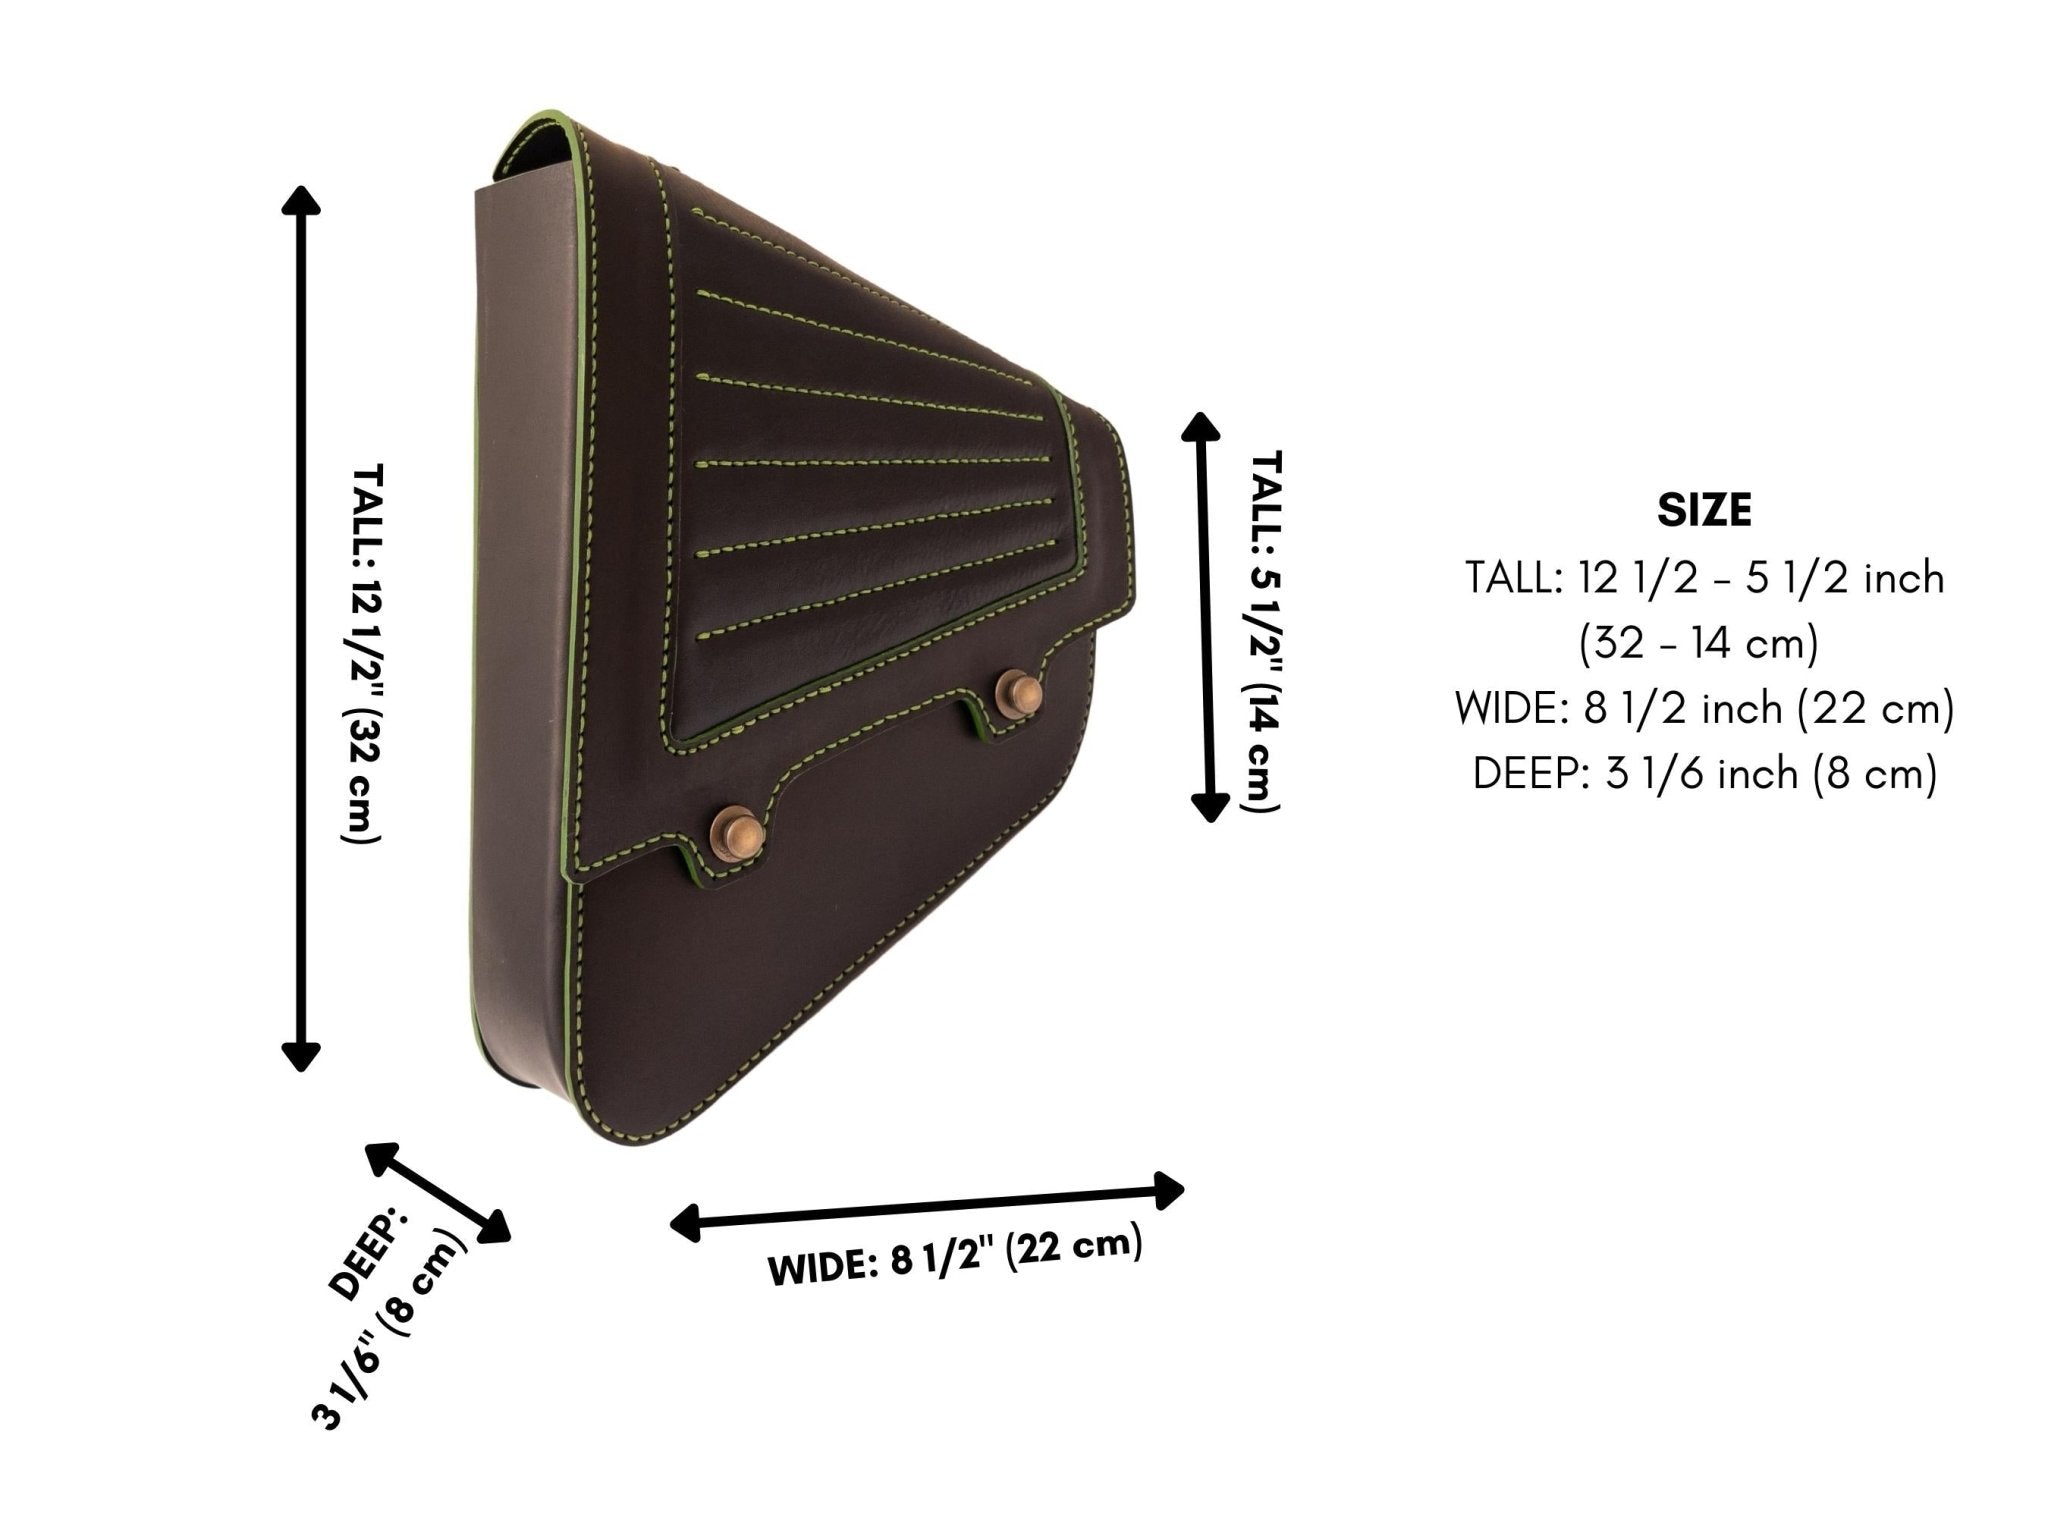 Swing Arm Bag, PDF Pattern and Instructional Video by Vasile and Pavel - Vasile and Pavel